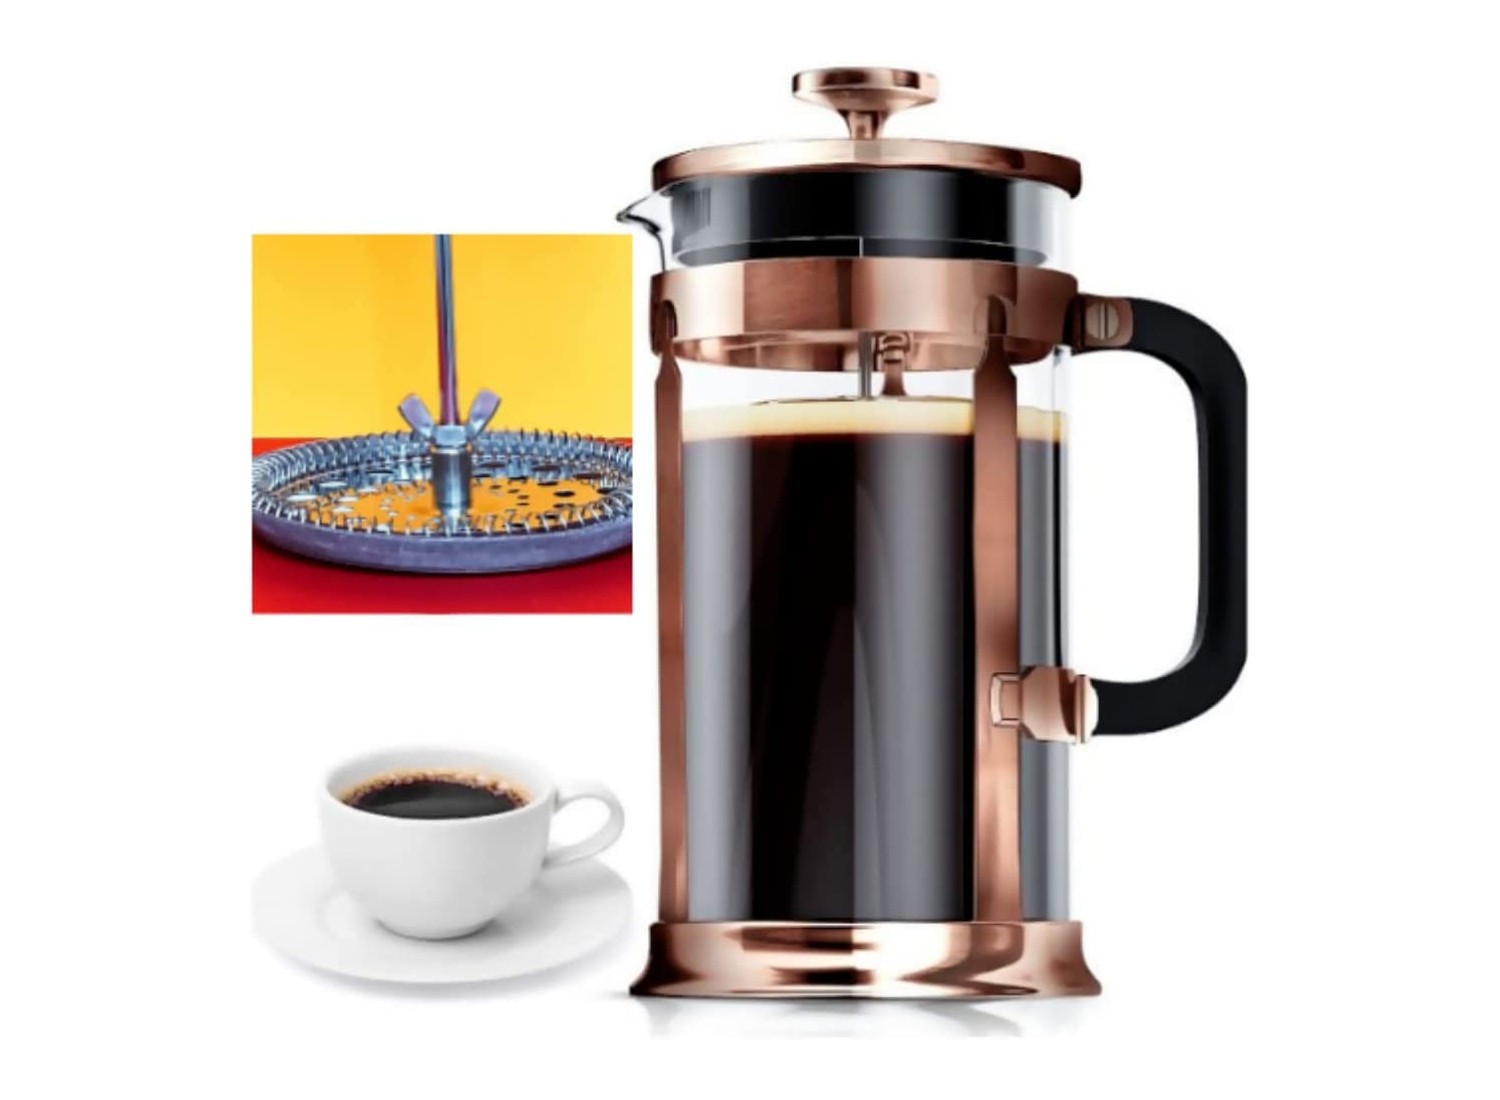 Mueller French Press Coffee Maker Review: A Value Proposition You